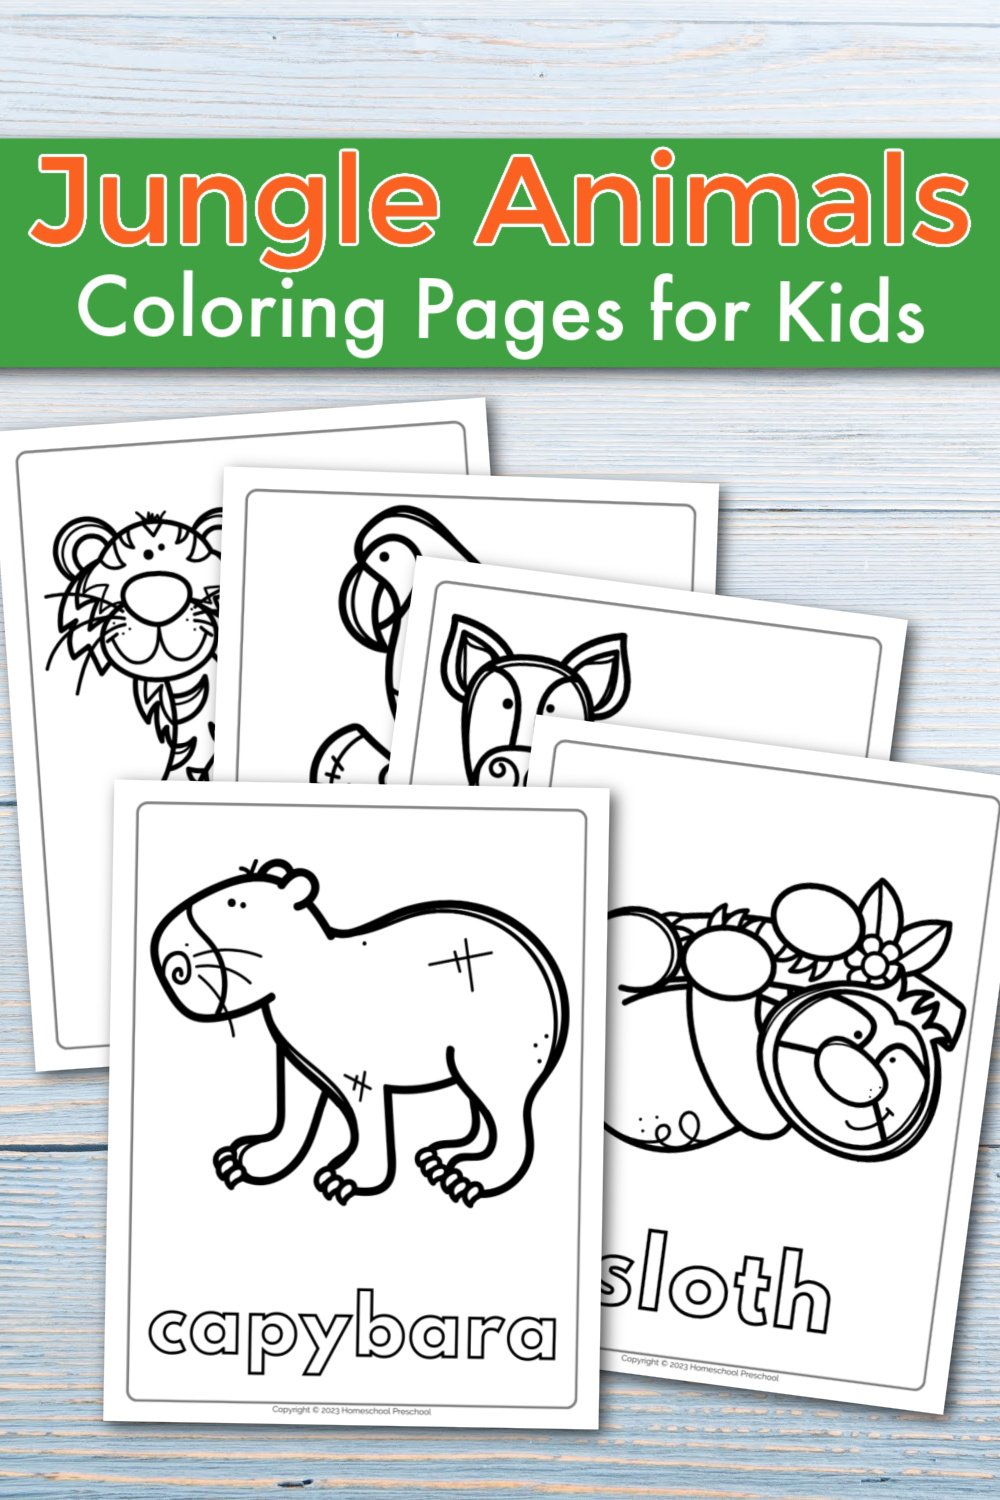 Jungle Animals Coloring Pages for Preschoolers